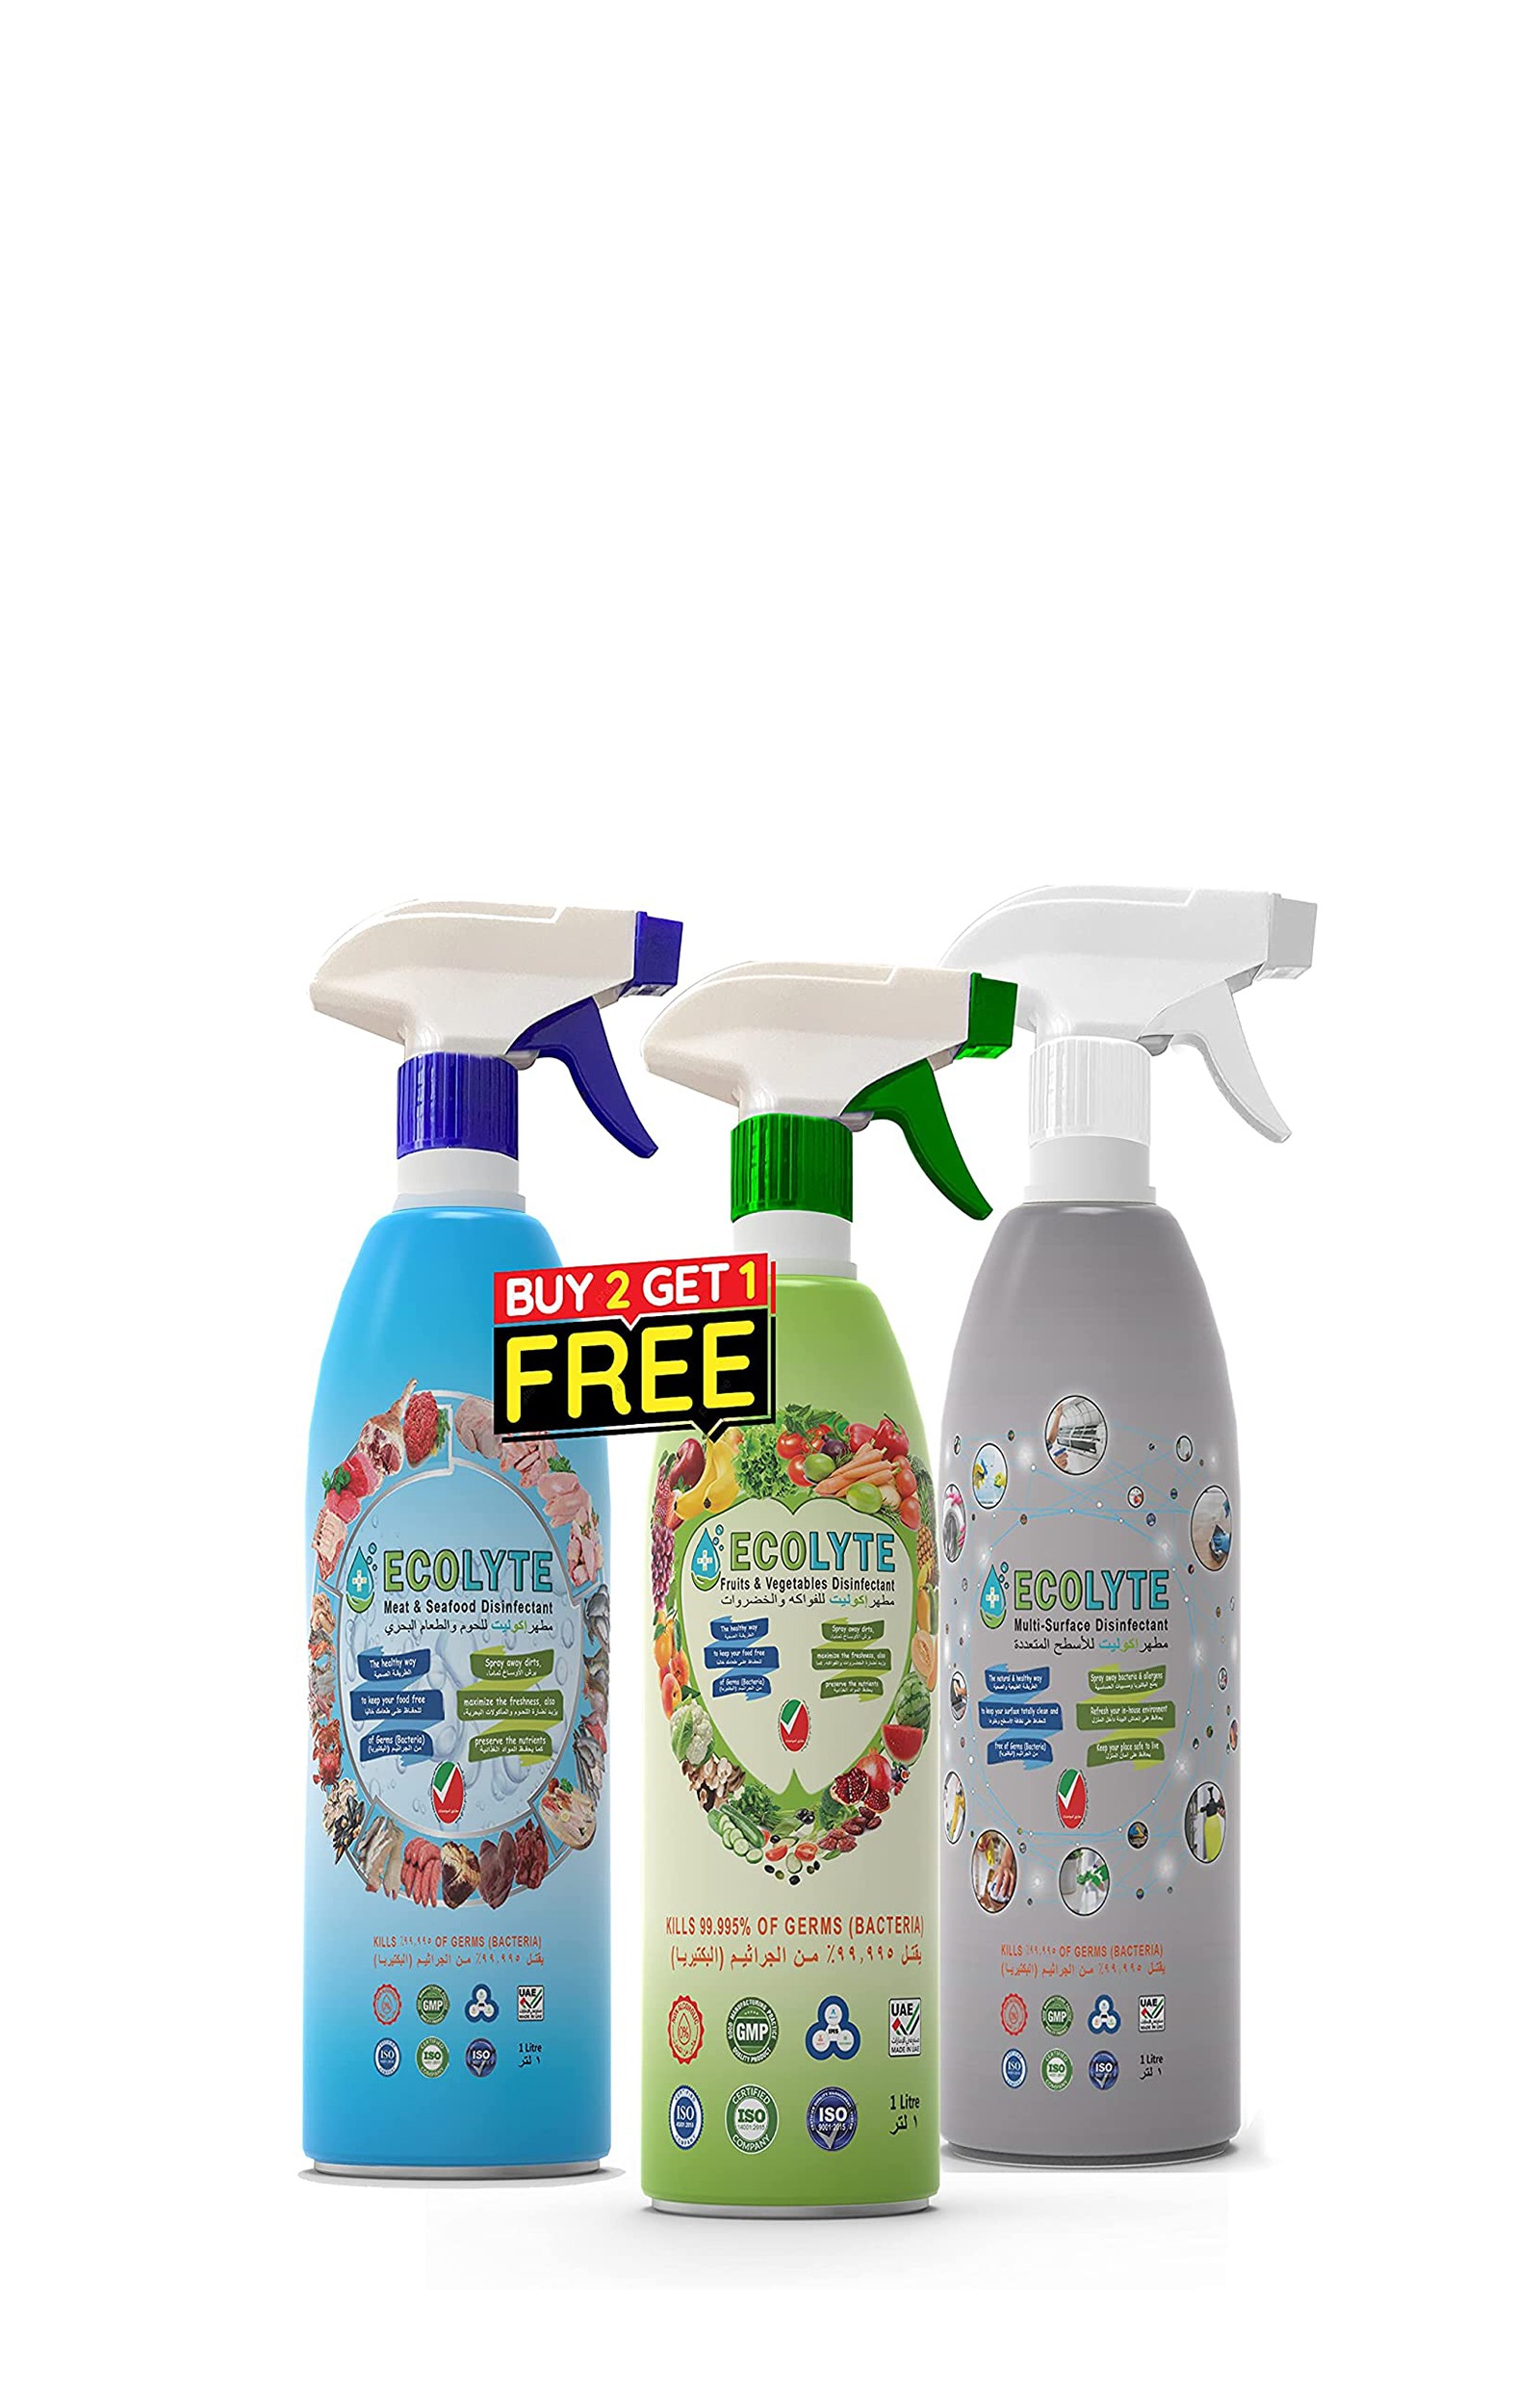 Ecolyte + All in one Disinfectant Bundle ( 1Litre)